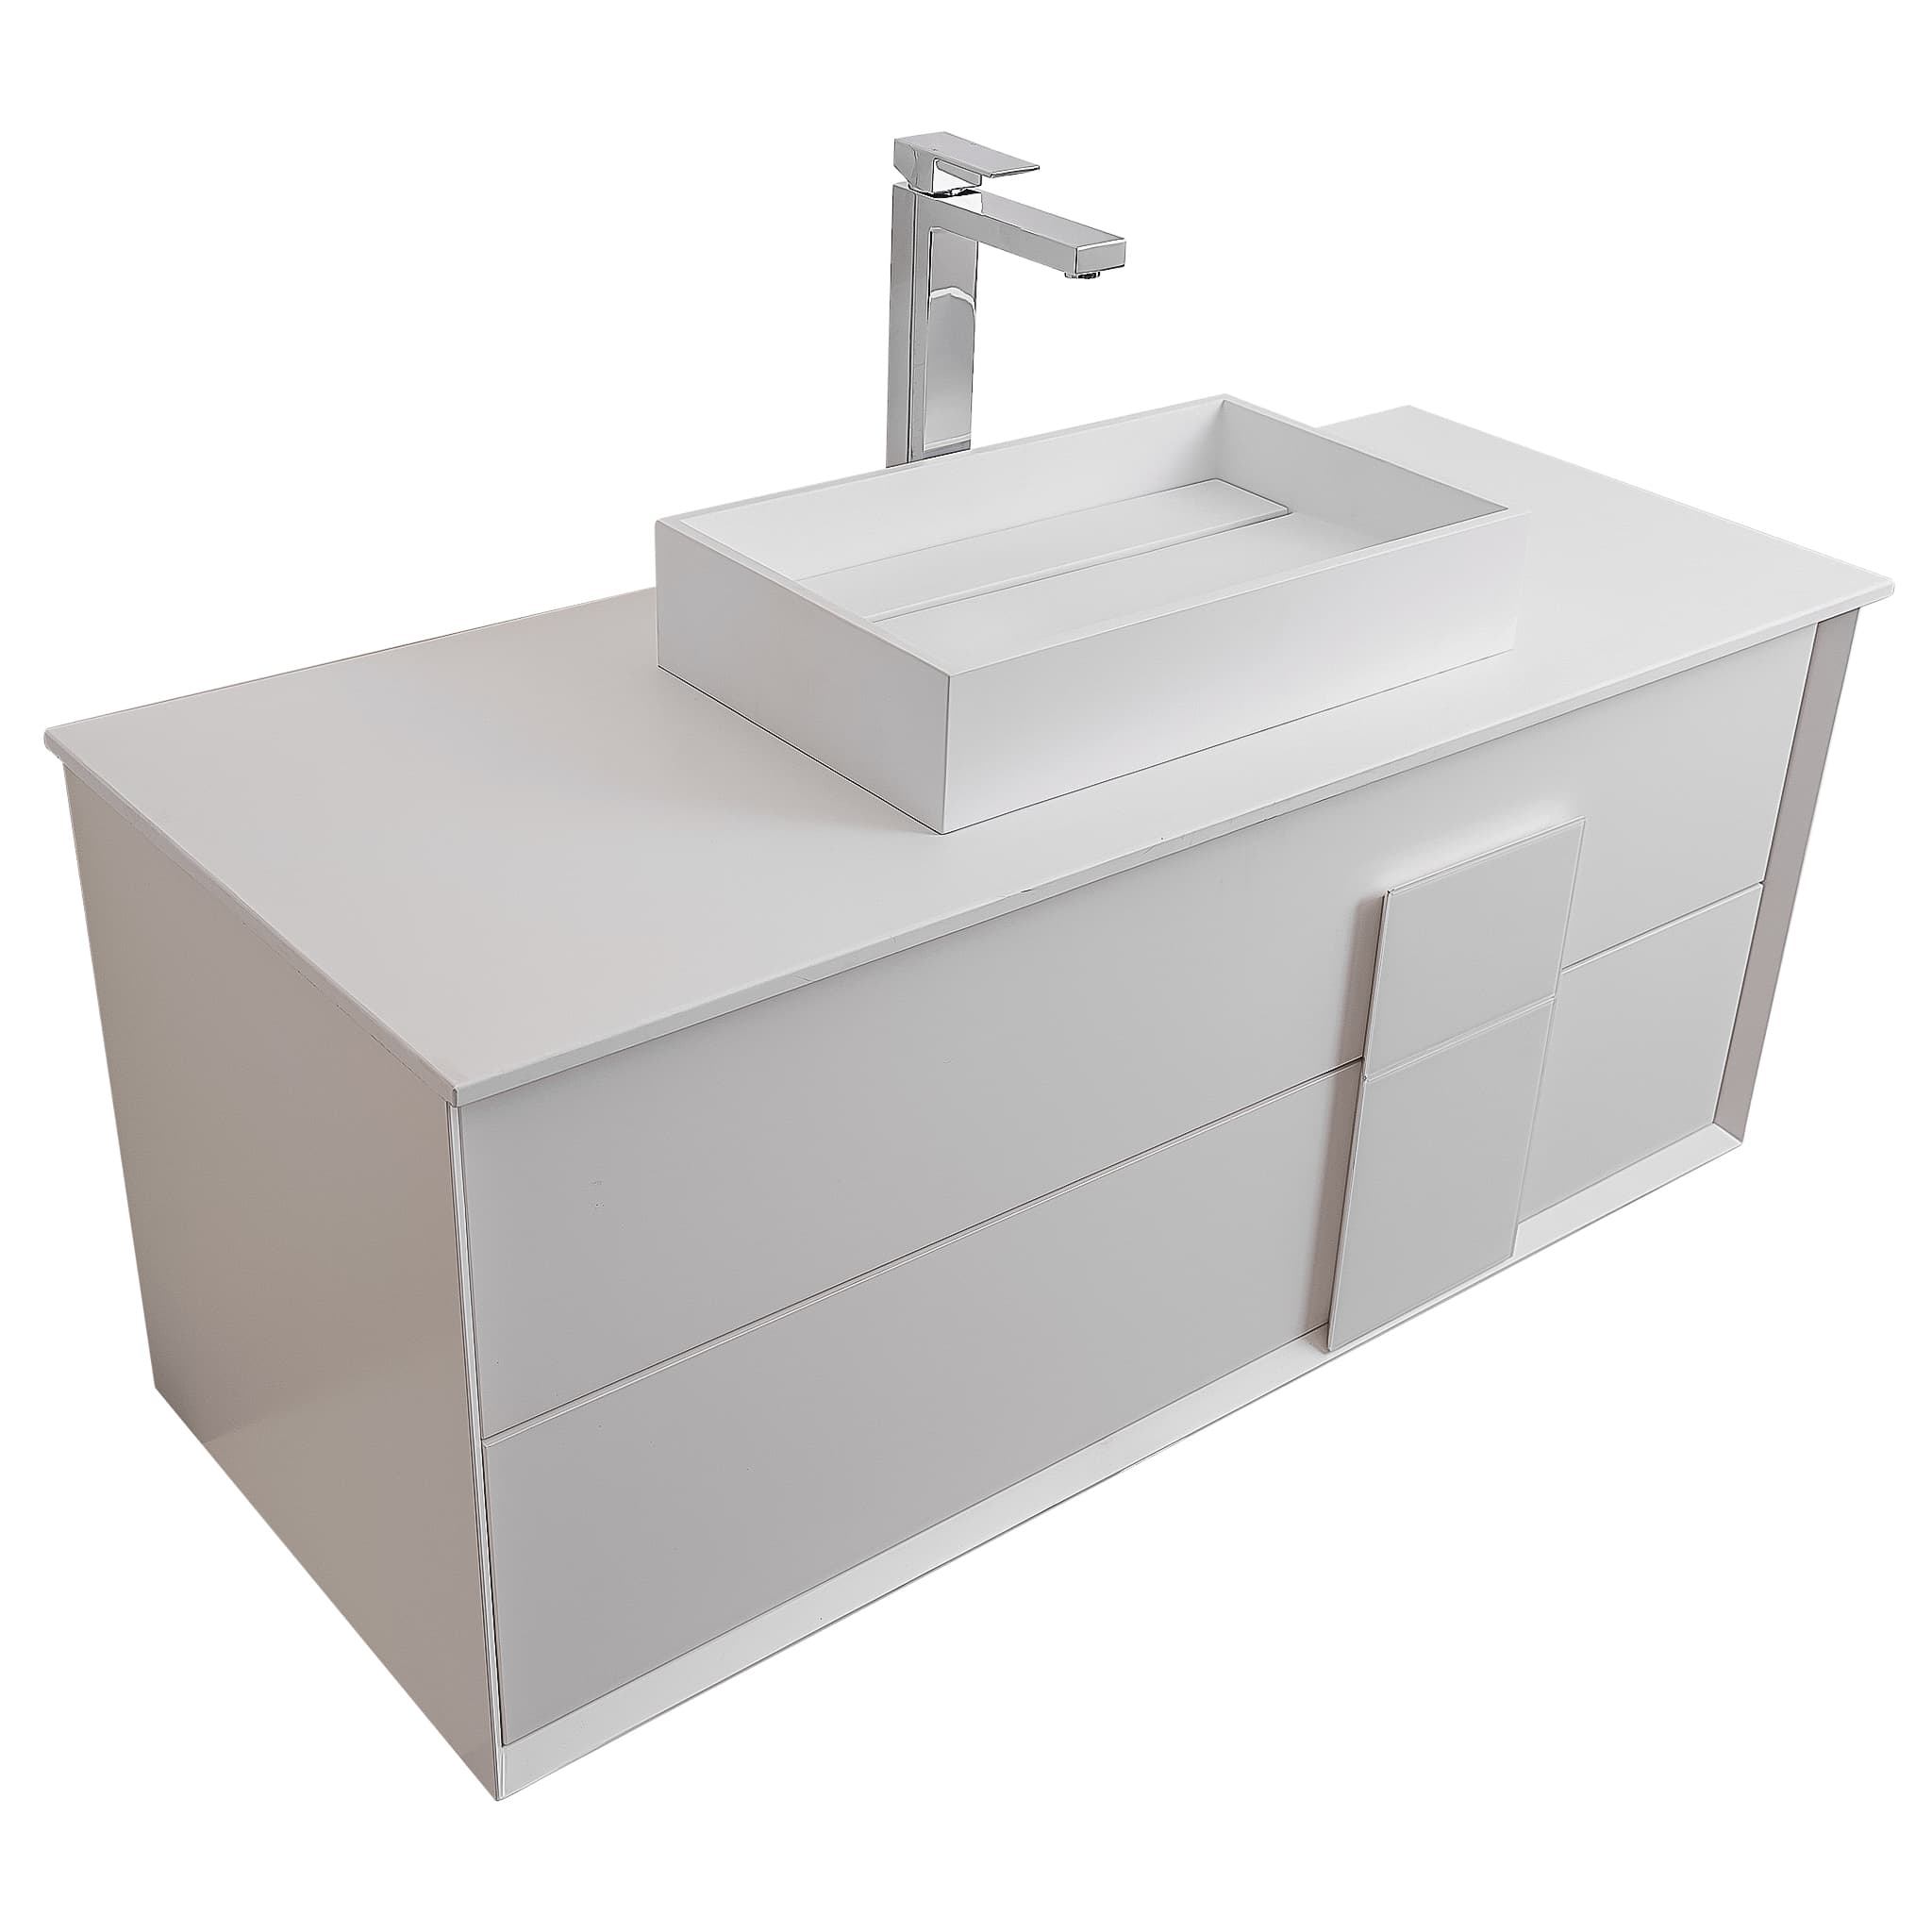 Piazza 47.5 Matte White With White Handle Cabinet, Solid Surface Flat White Counter and Infinity Square Solid Surface White Basin 1329, Wall Mounted Modern Vanity Set